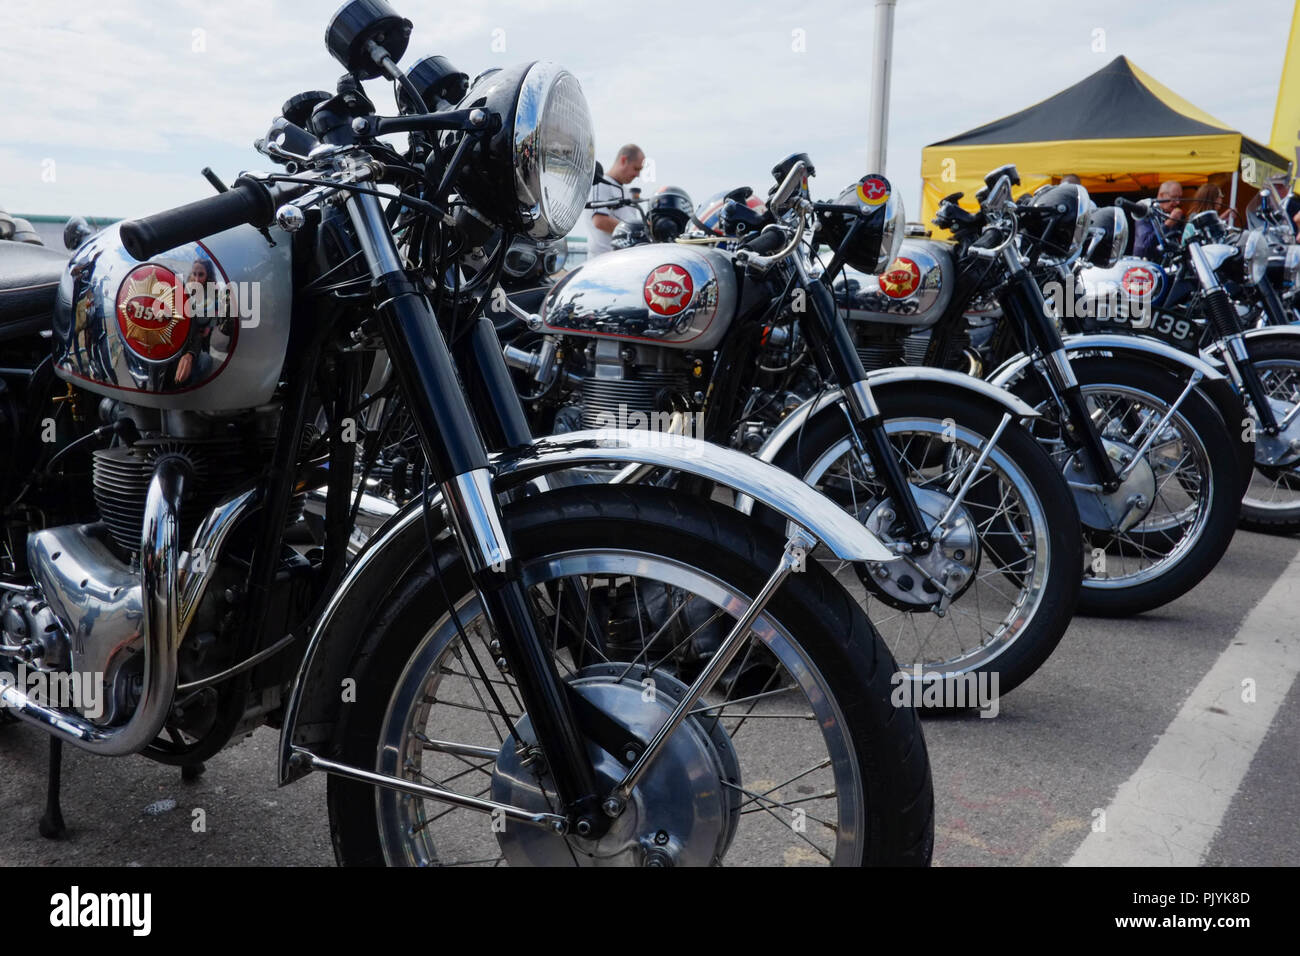 Brighton, UK. 9th September , 2018The annual Ace Cafe Brighton Burn Up where bikers gather at the Ace Cafe in North London and travel to brighton. Andrew Steven Graham/Alamy Live News Stock Photo